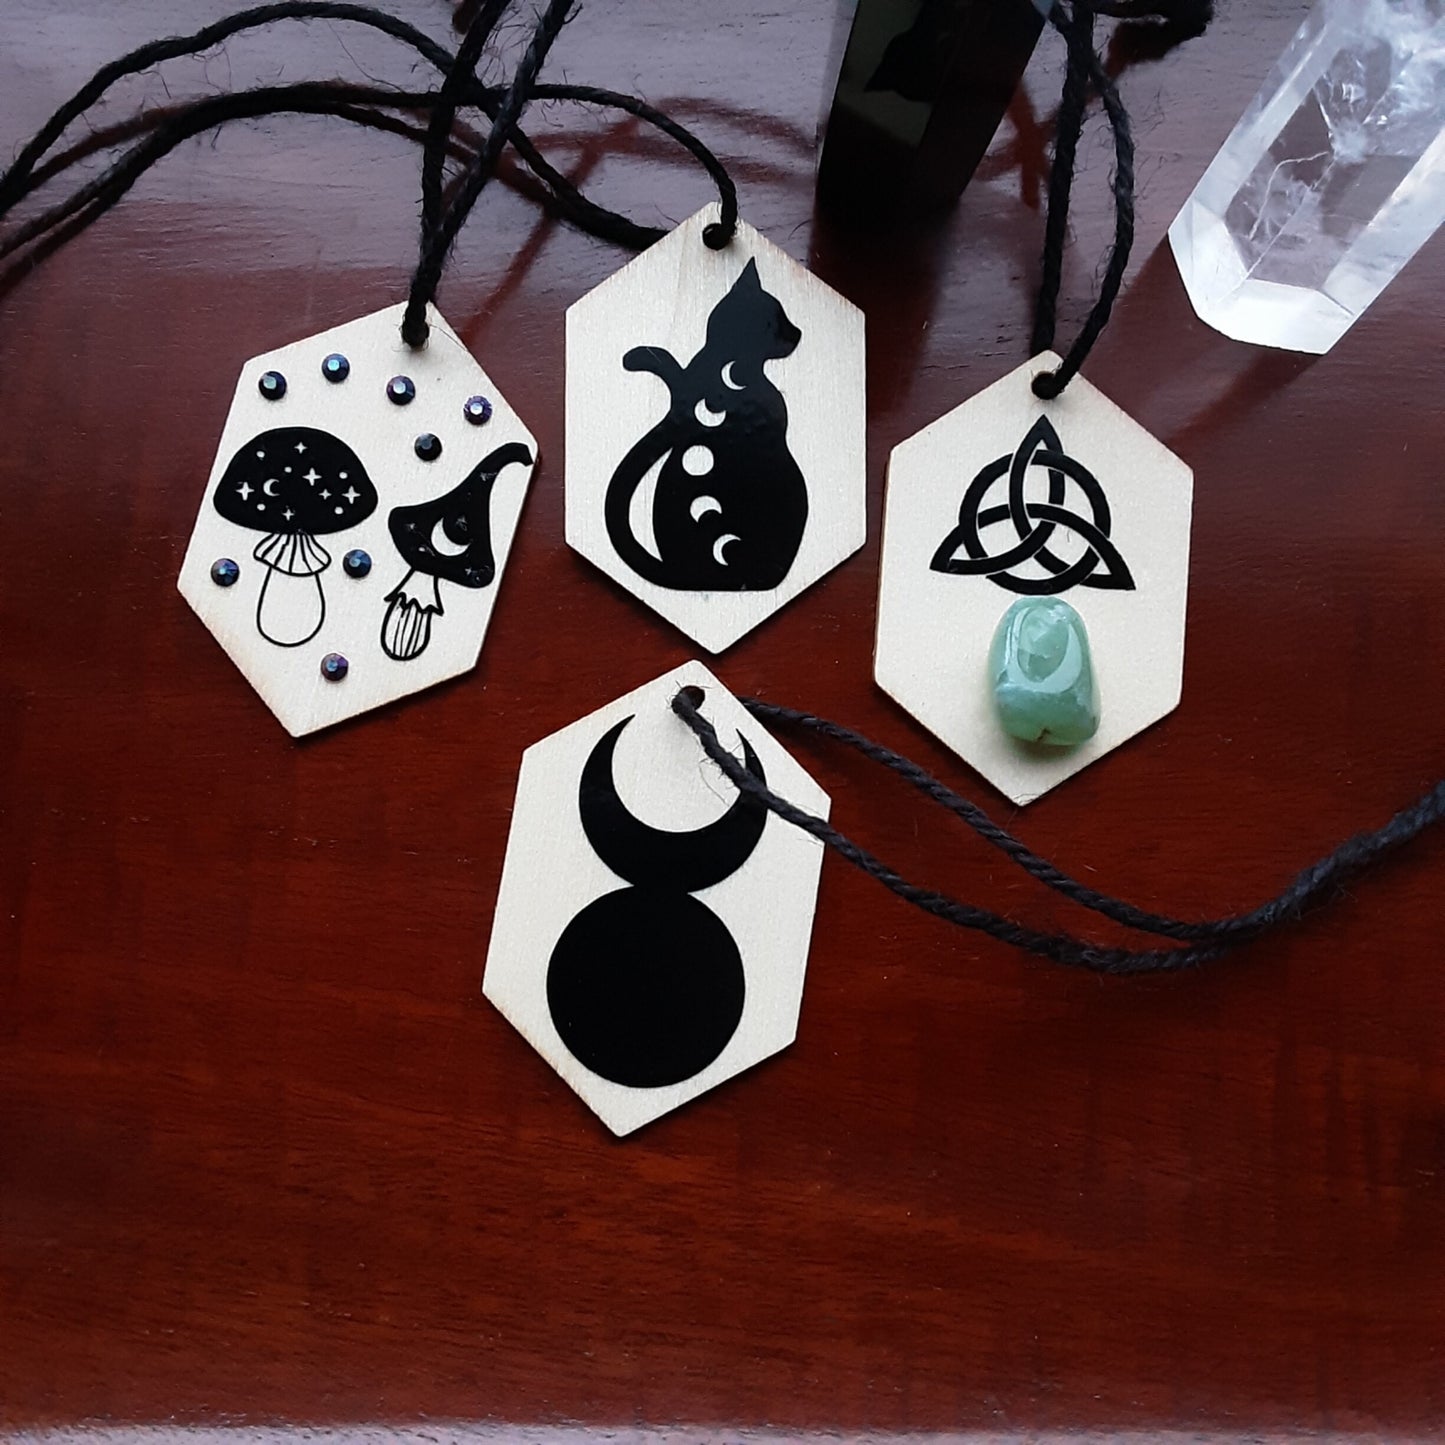 Yule ornaments, 1 pc wooden decor, Triquetra, Black Cat, Mushroom, Horned God Pagan Holiday decor, Witchy Gothic vibes, Pagan